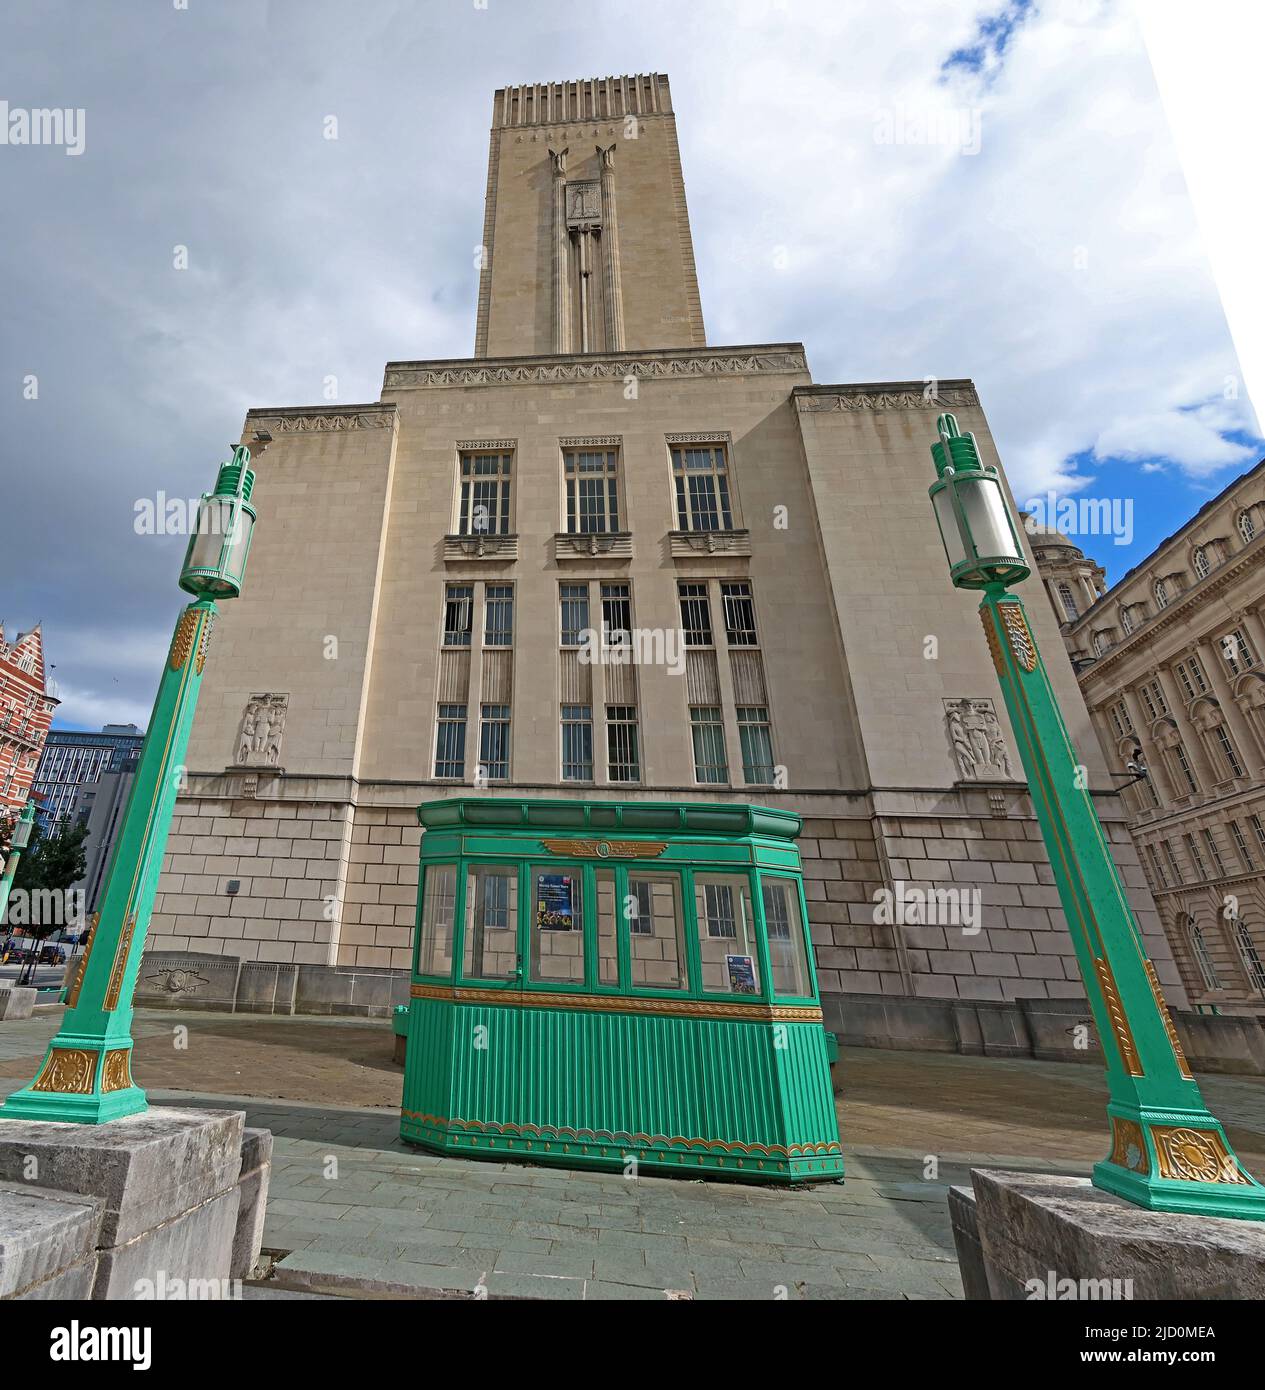 Historic Mersey Tunnel toll booth & exhaust, as would be used for collecting charges, Pier Head Liverpool, Merseyside, England, UK, L3 1HN Stock Photo